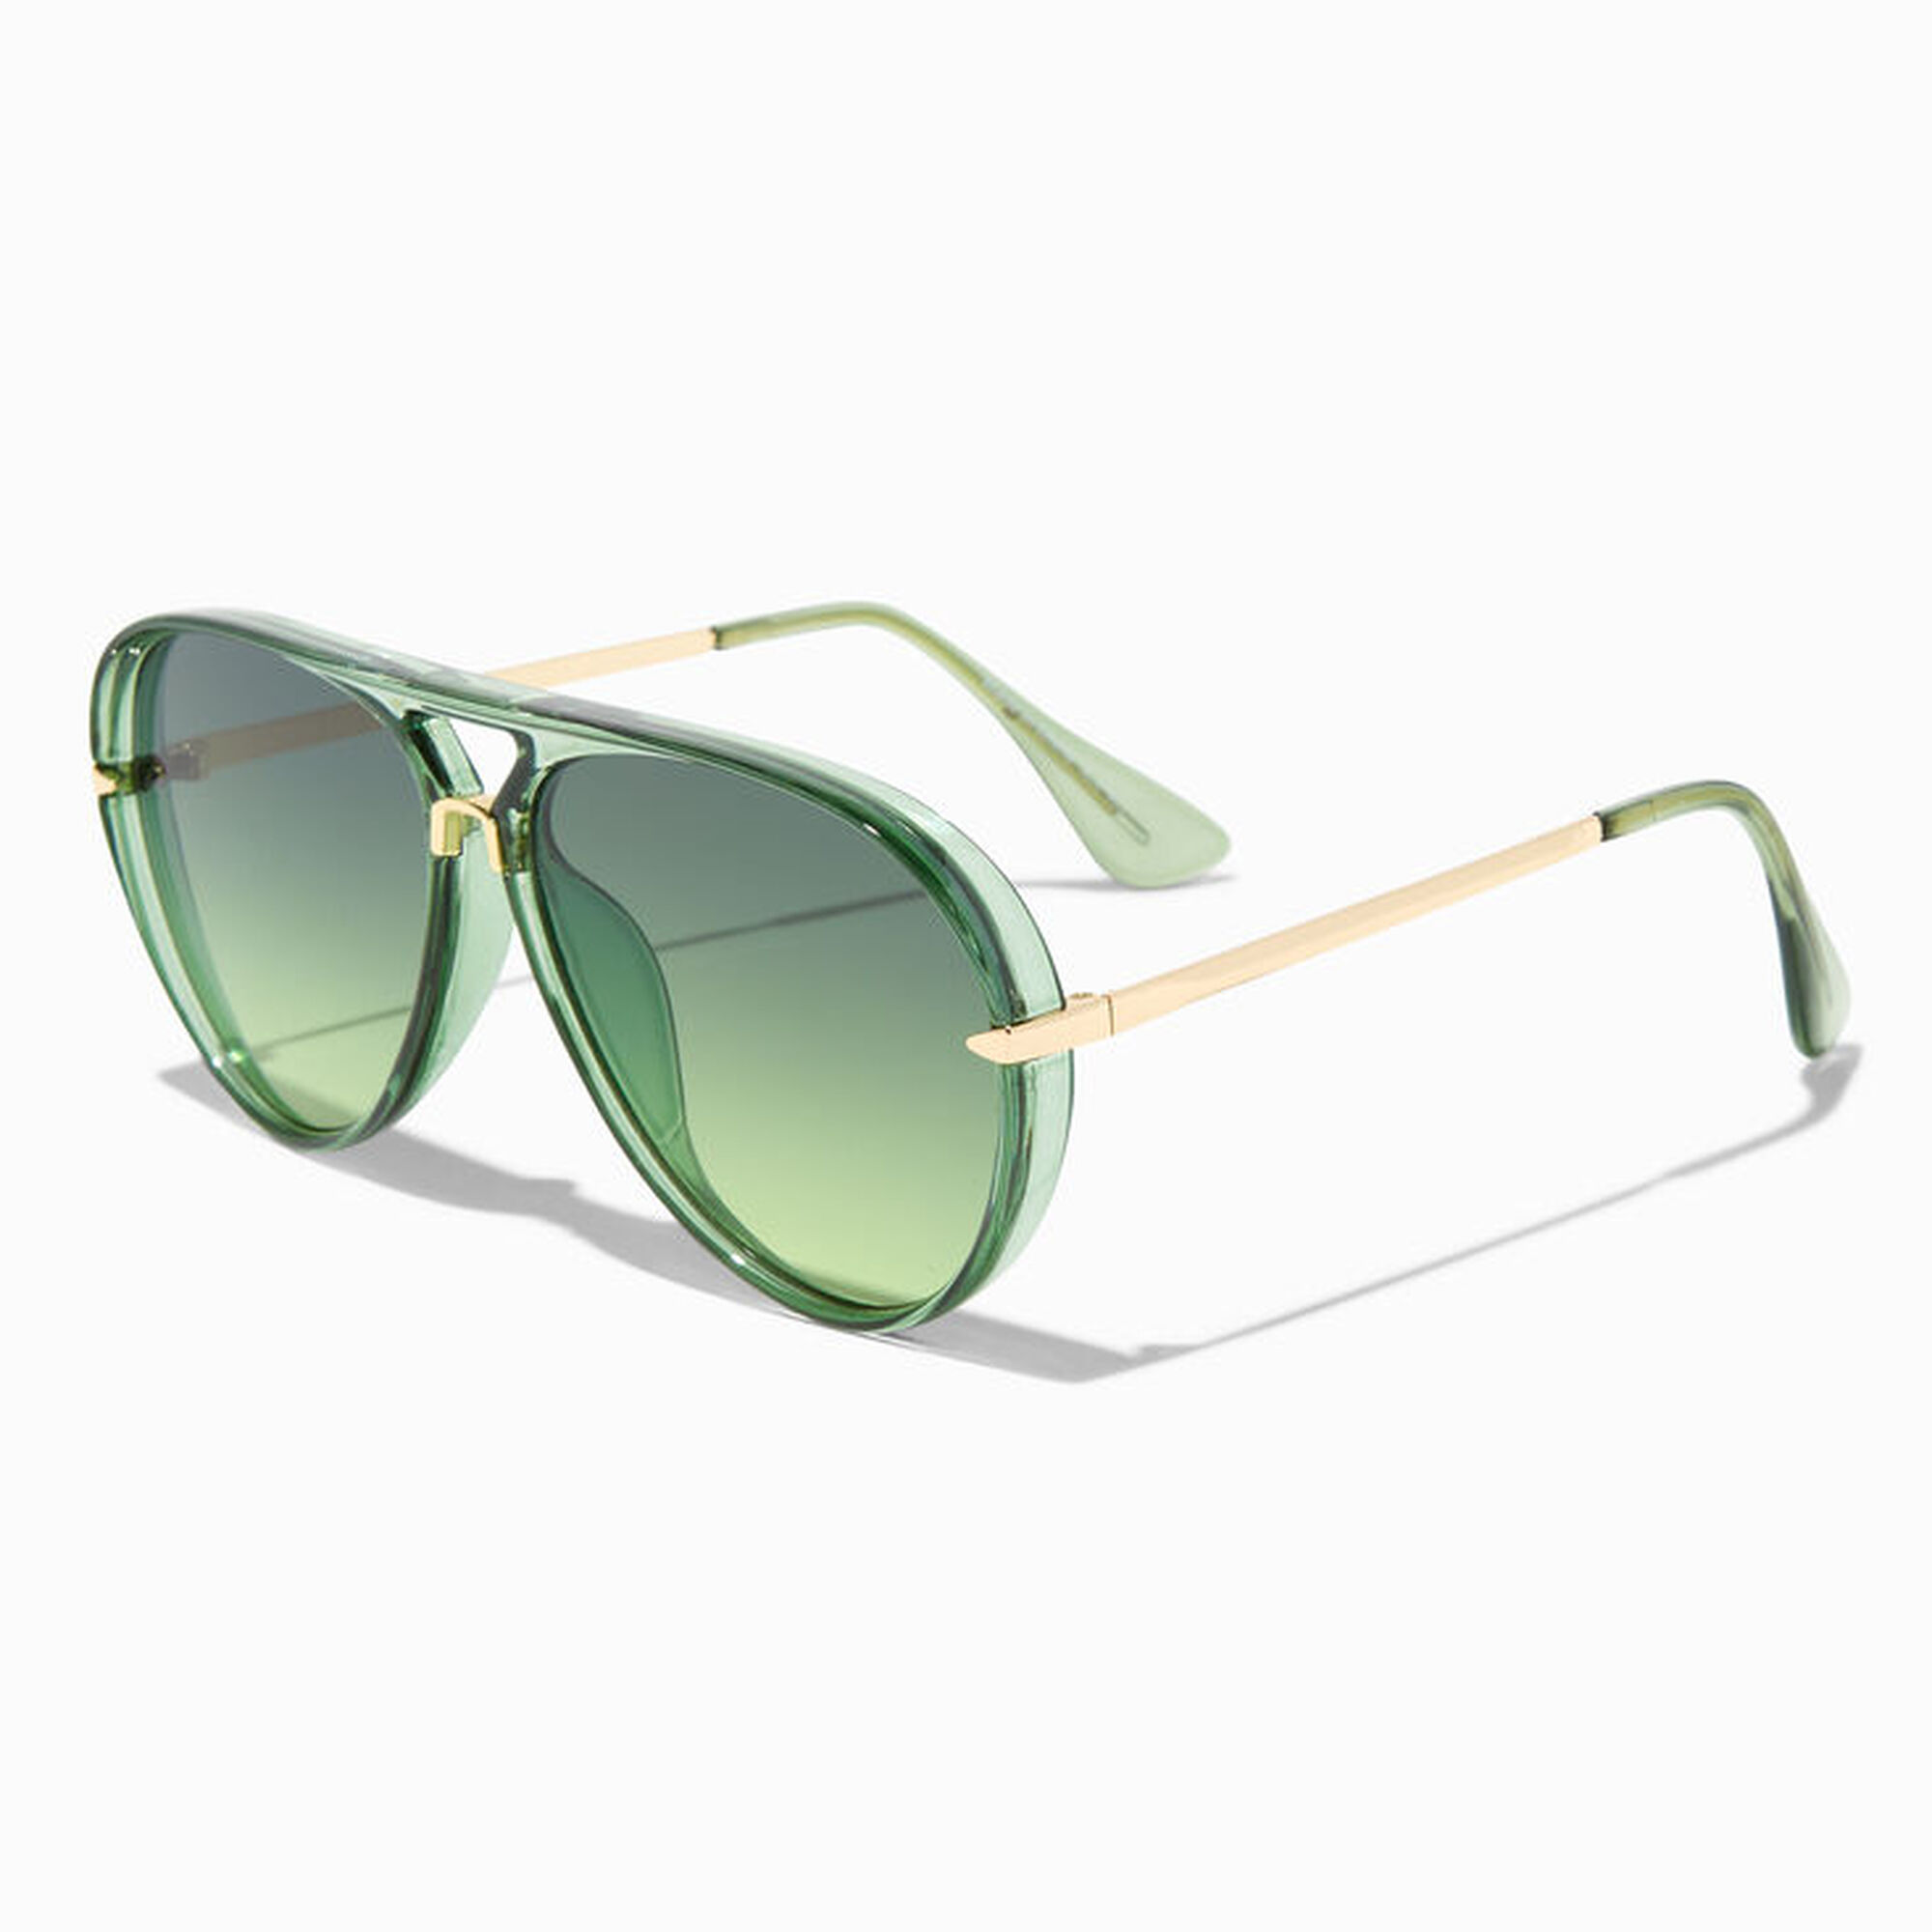 View Claires Faded Lens Aviator Sunglasses Green information